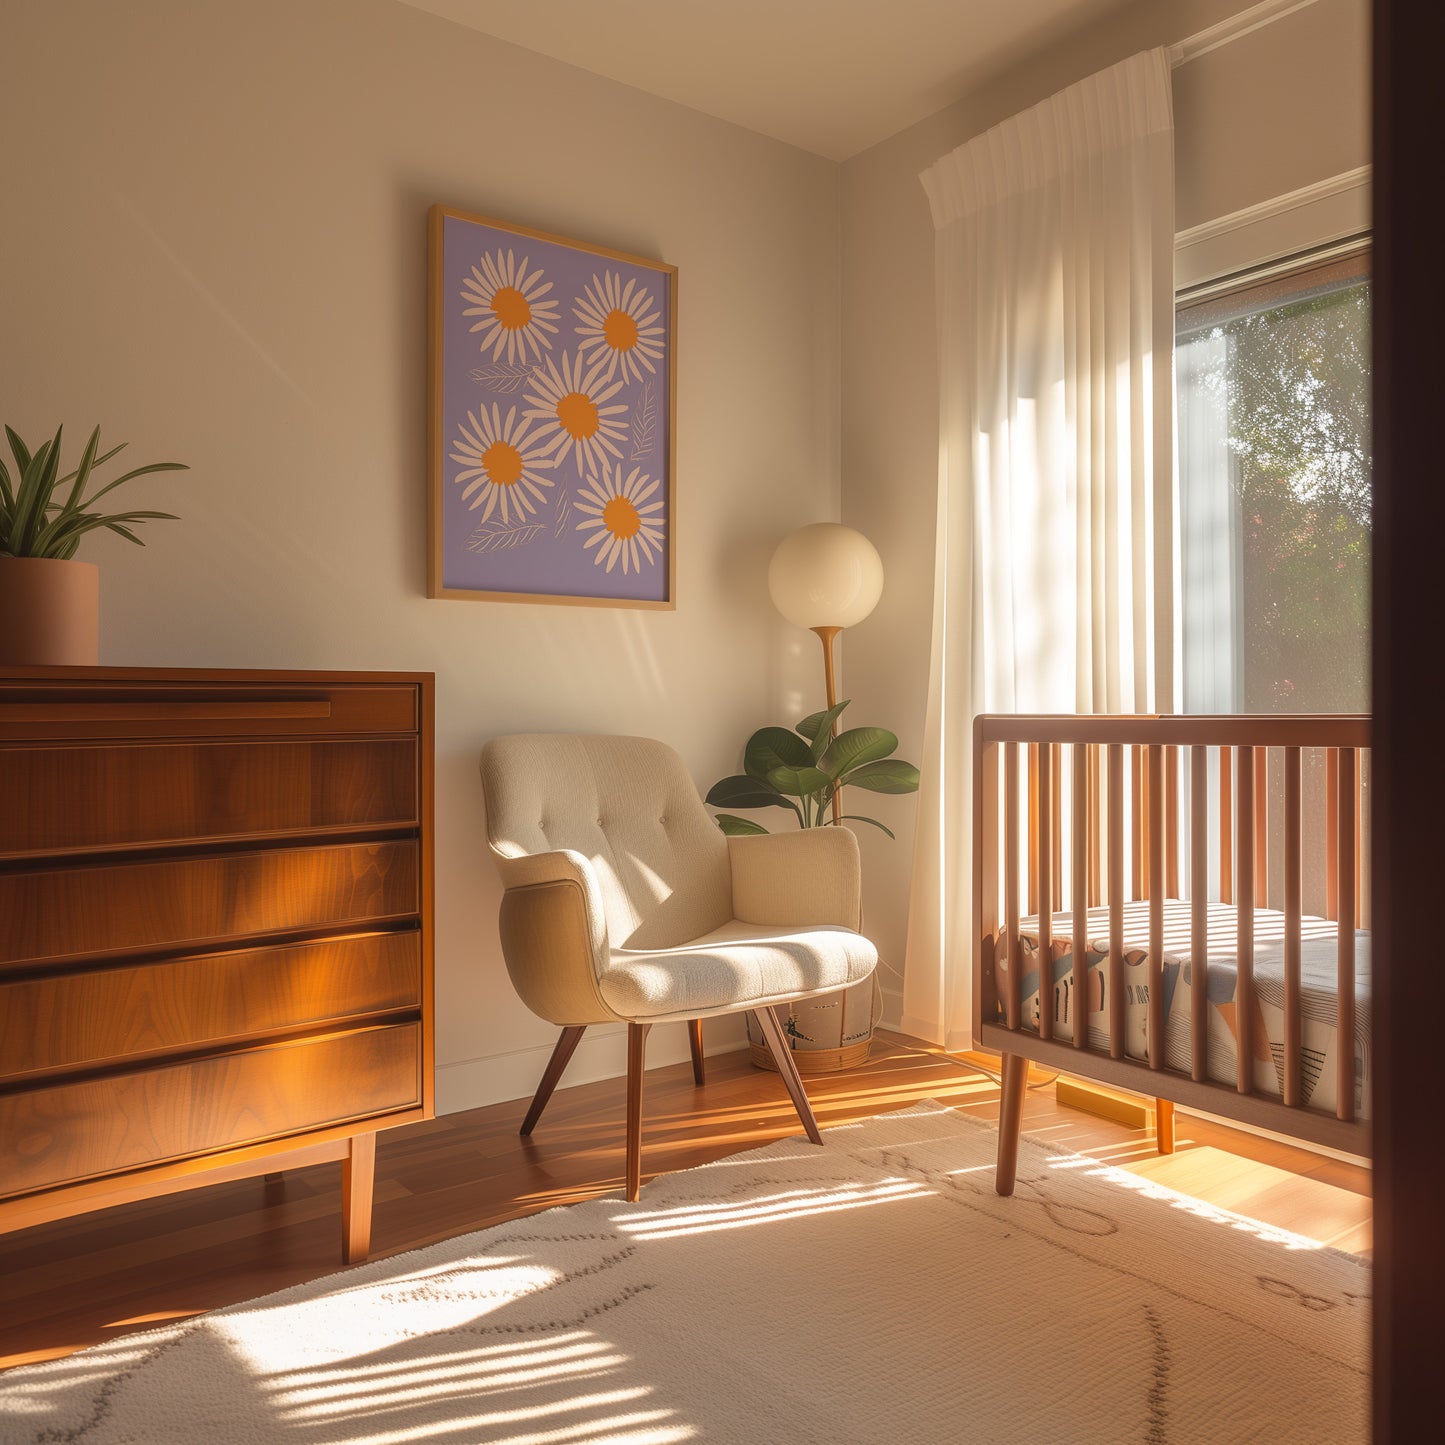 A cozy nursery room with a crib, armchair, dresser, and warm sunlight filtering through the window.